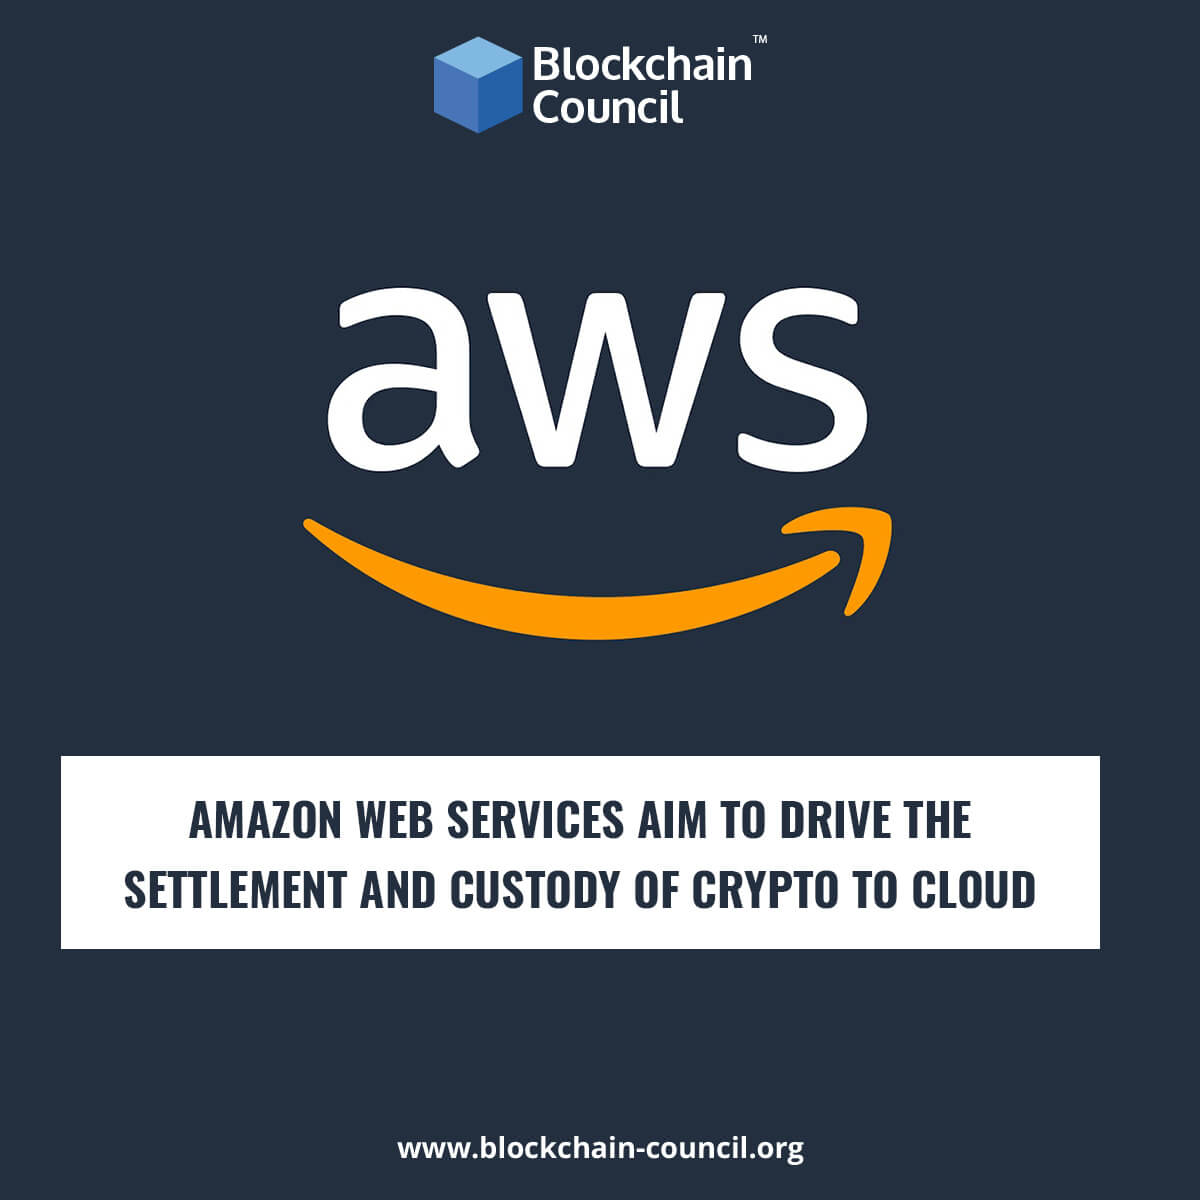 Amazon Web Services Aim To Drive The Settlement And Custody Of Crypto To Cloud